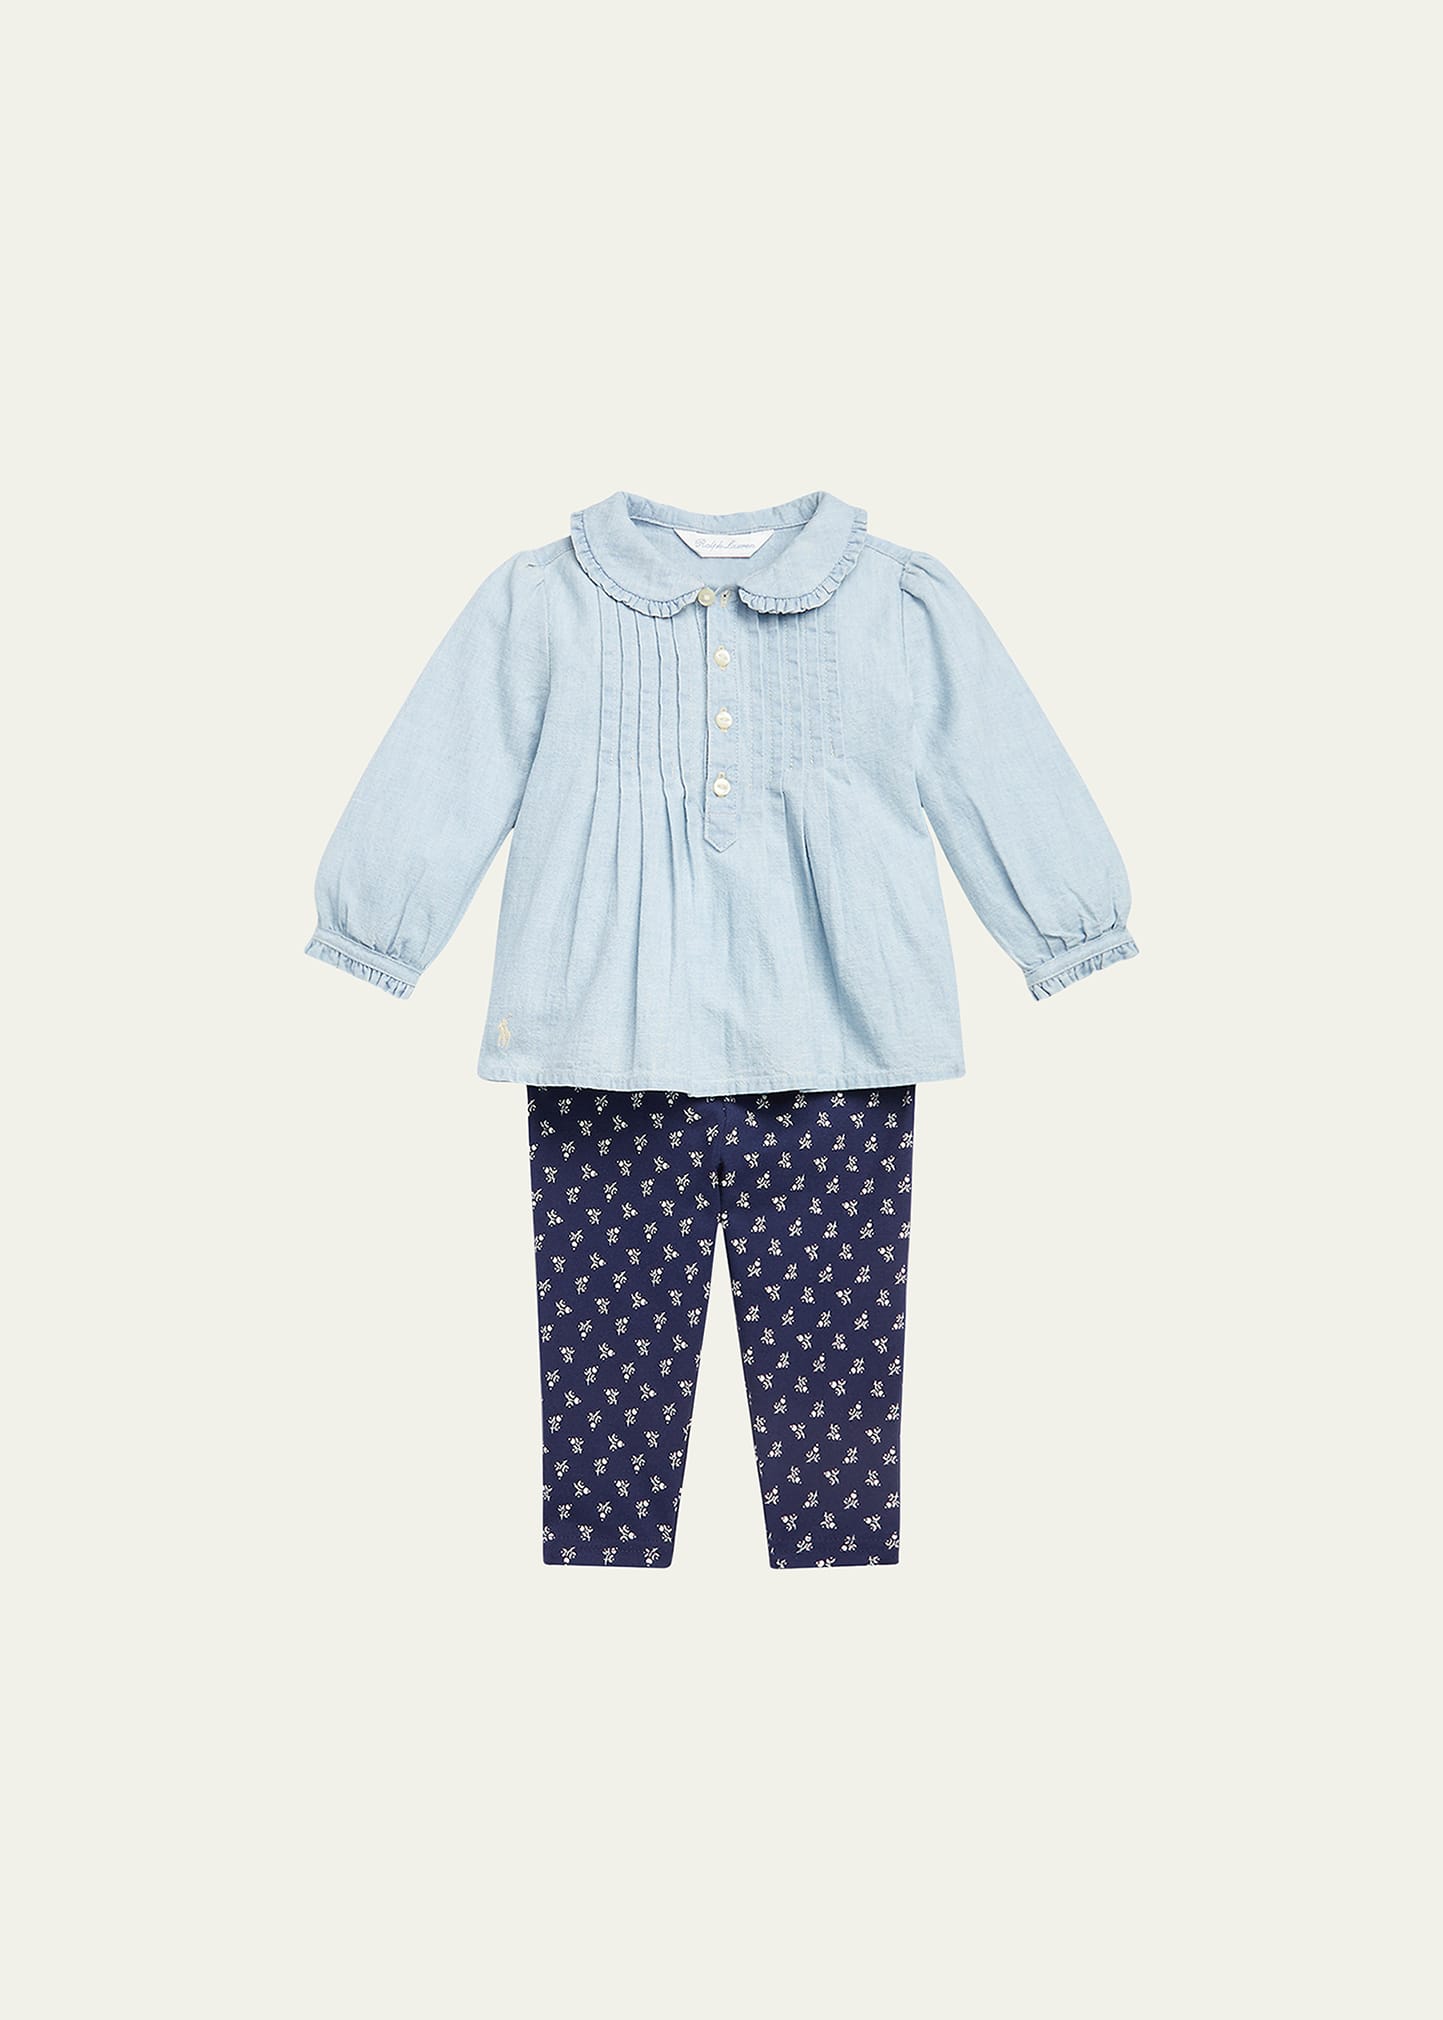 Girl's Chambray Top W/ Floral Leggings, Size 3M-24M